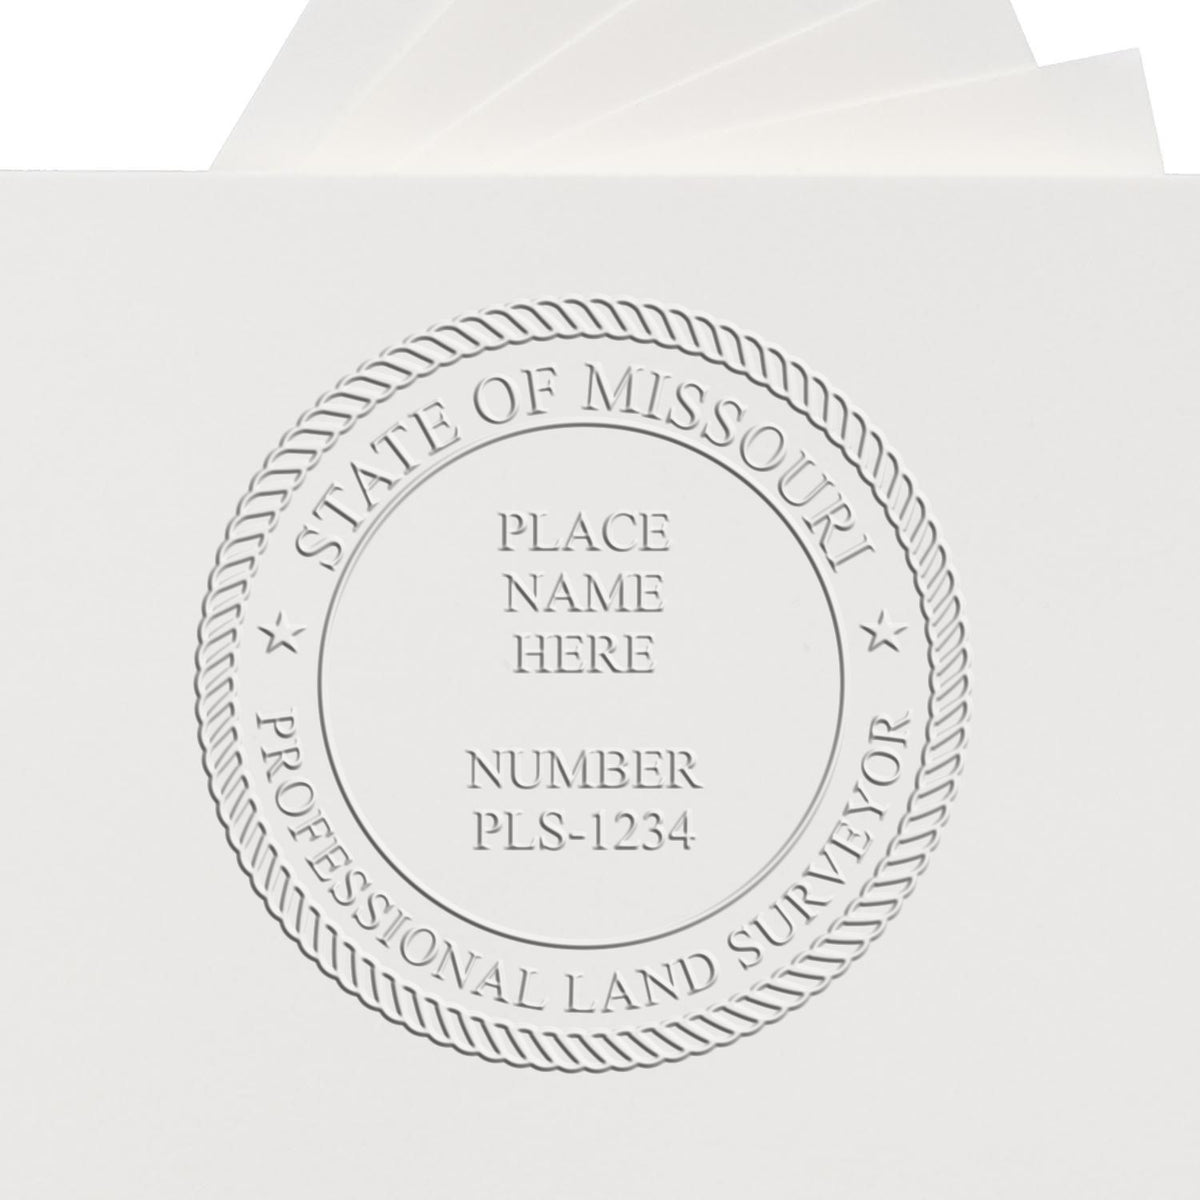 An alternative view of the Heavy Duty Cast Iron Missouri Land Surveyor Seal Embosser stamped on a sheet of paper showing the image in use